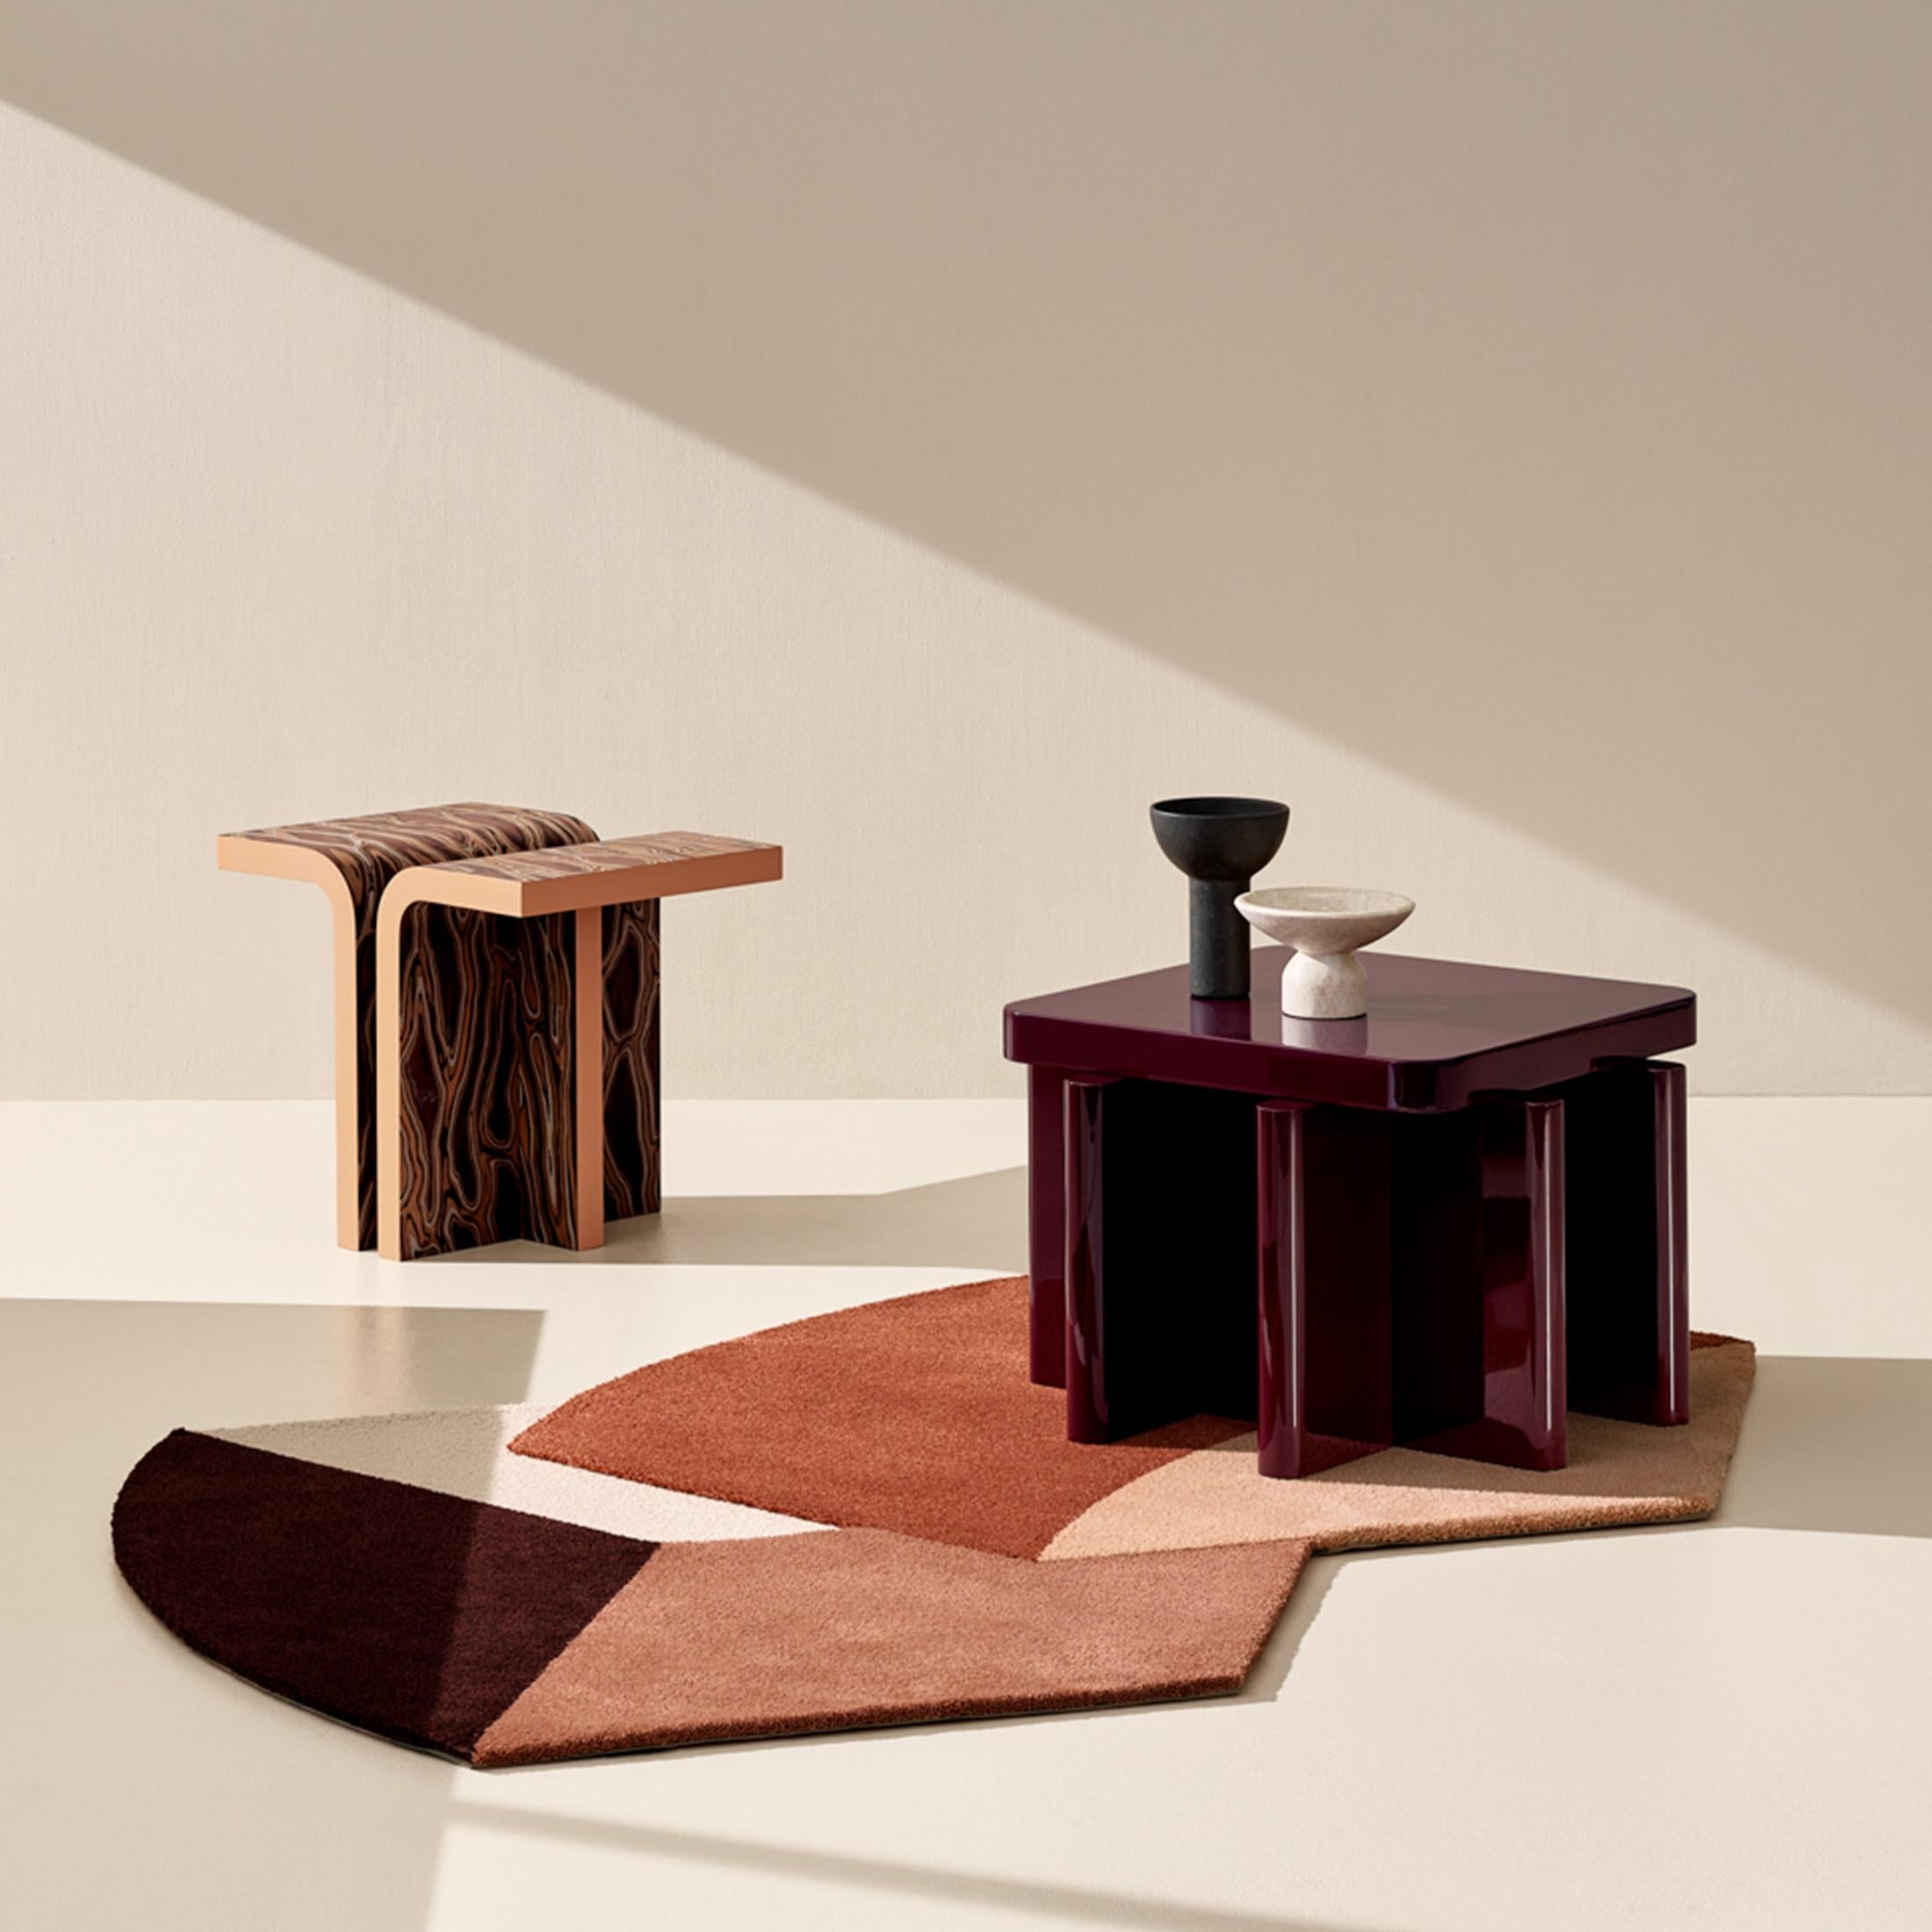 Spina is a collection of lacquered tables and seatings.

The lacquered surfaces and consistent rhythm of the planes create a visual play of light, shadow and reflection, adding depth and richness to this already visually graphic collection. The